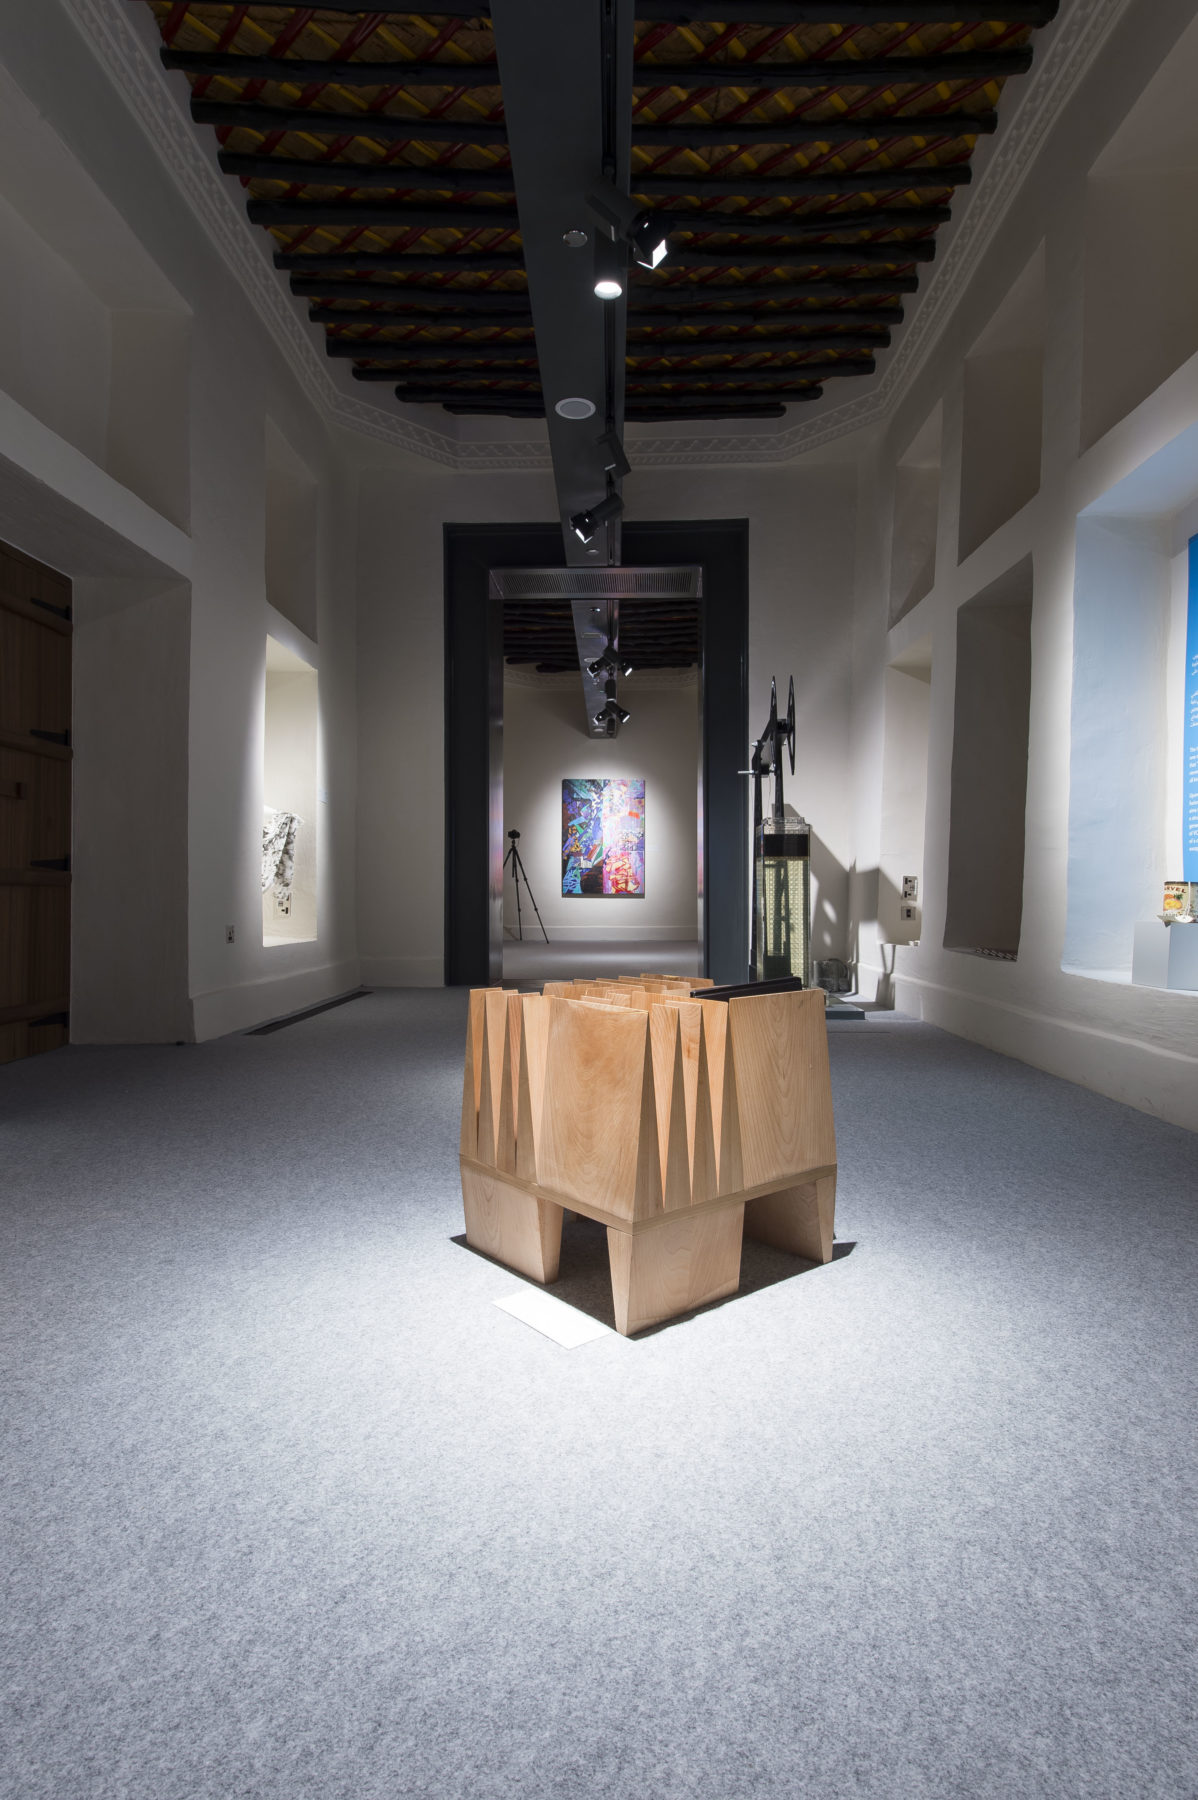 Design objects in the Strange Wonders vol.II exhibition at Mshreib